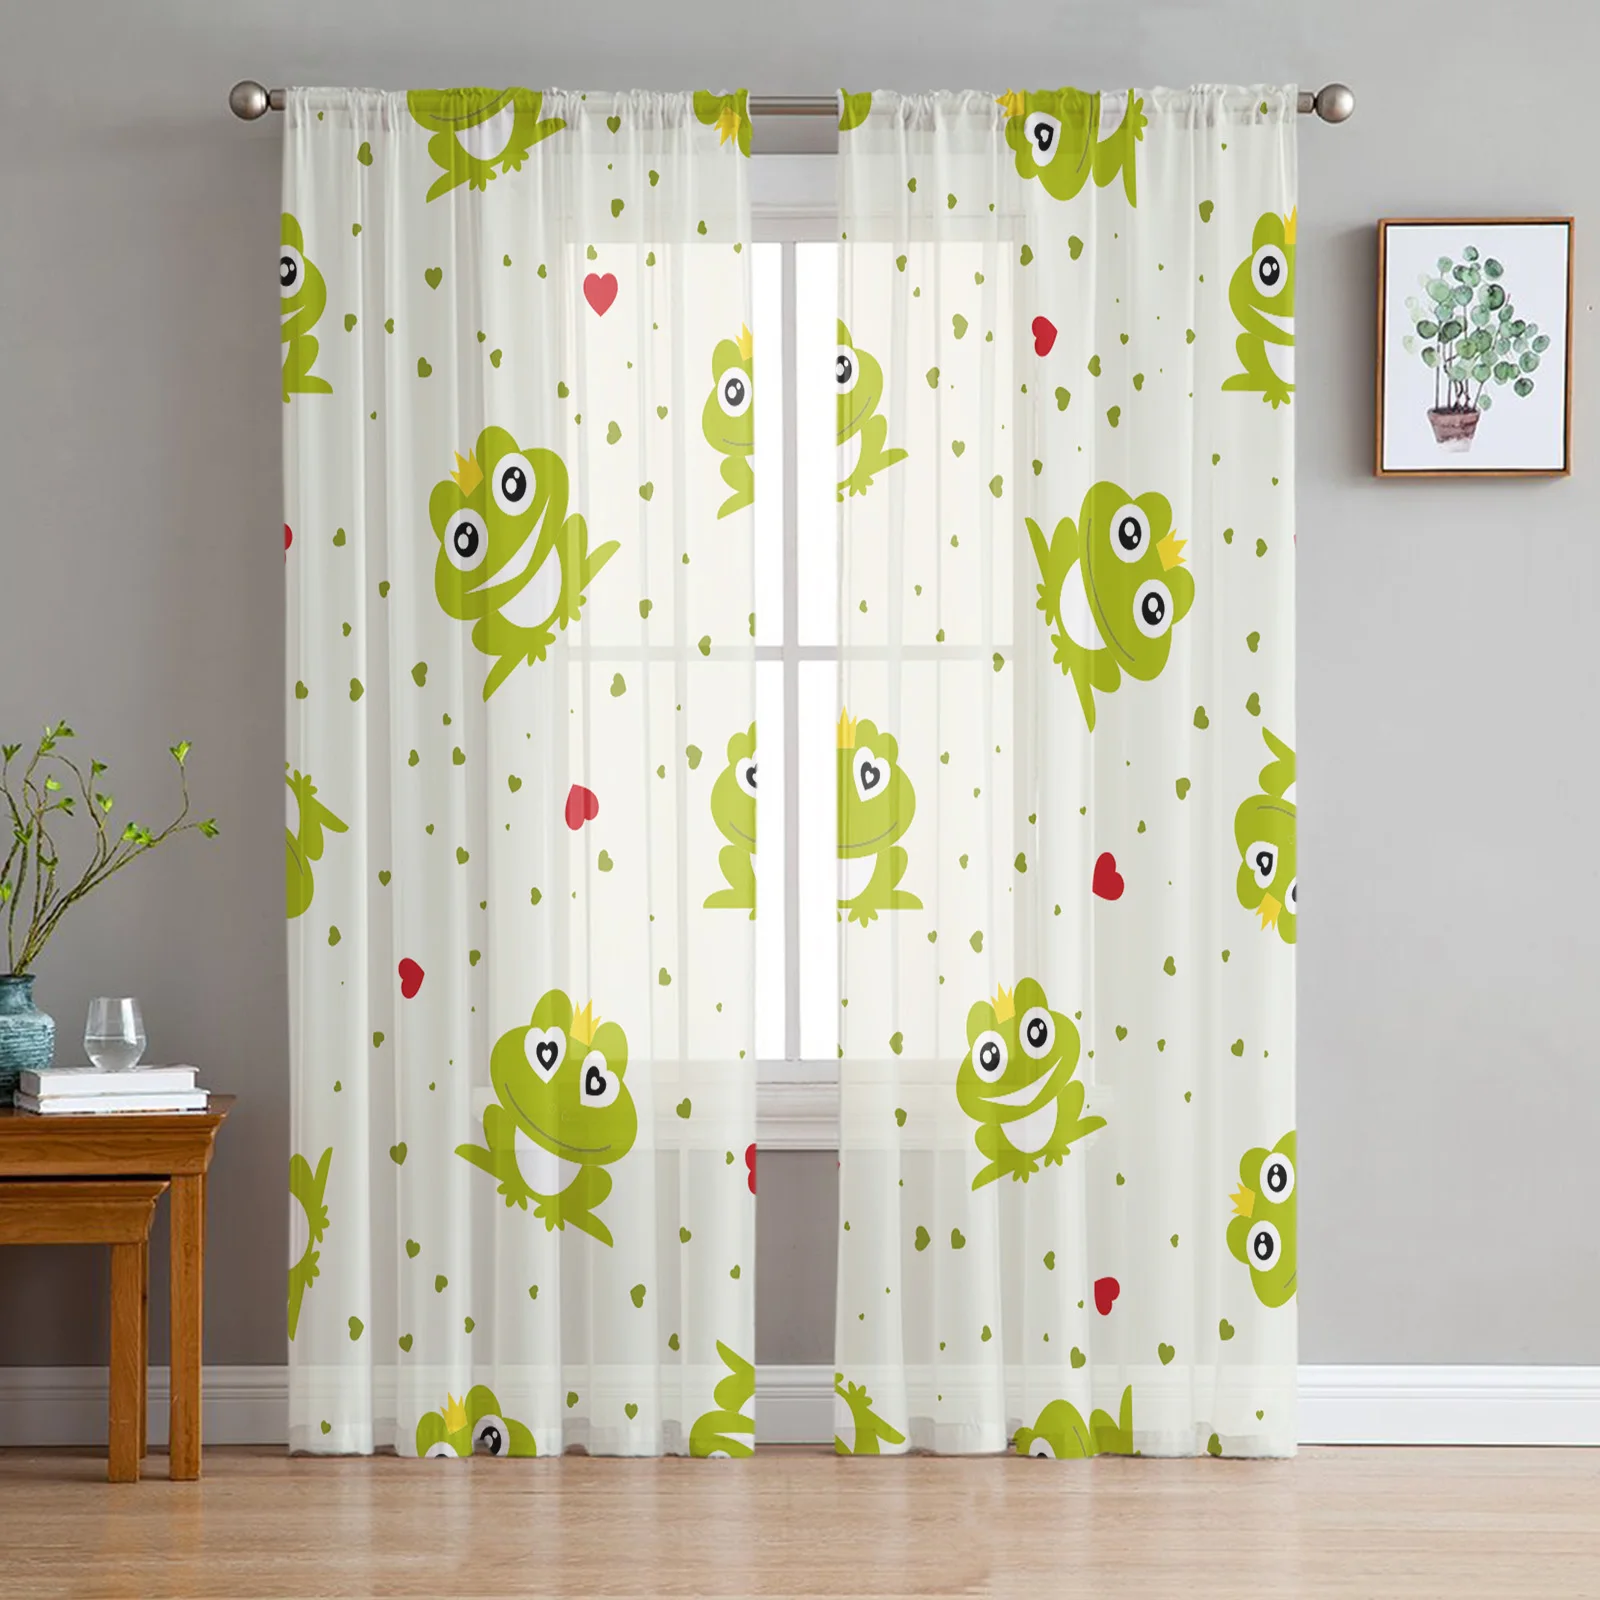 

Cartoon Cute Frog Prince Kawaii Sheer Curtain for Living Room Bedroom Voile Drape Kitchen Window Tulle Curtains Home Essentials